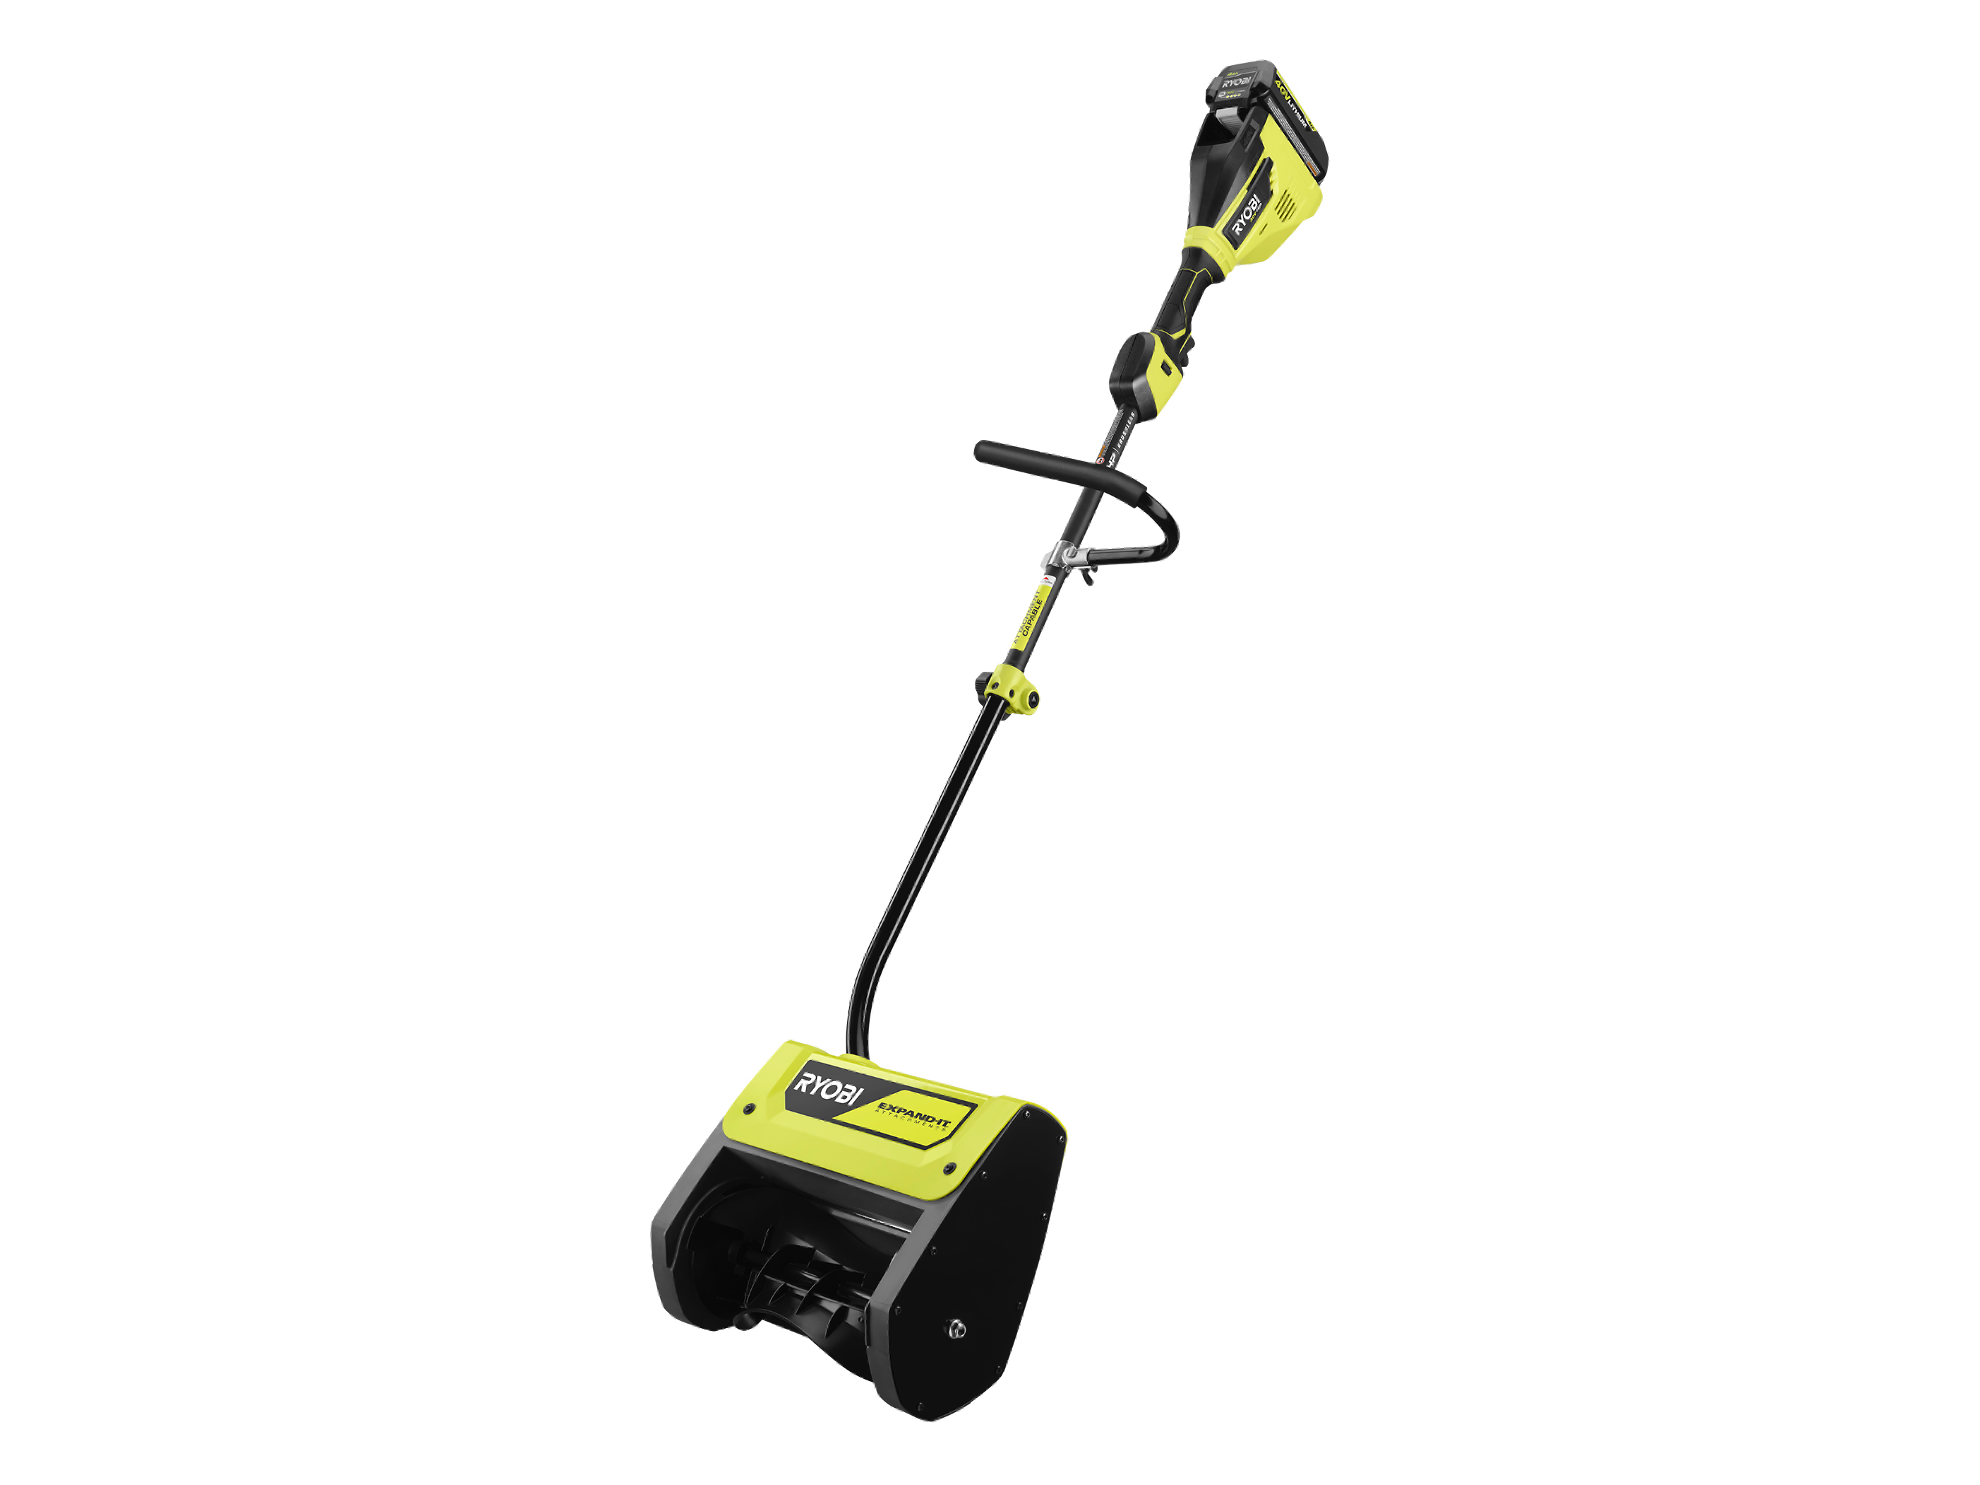 Product Features Image for 40V HP BRUSHLESS SNOW SHOVEL KIT.